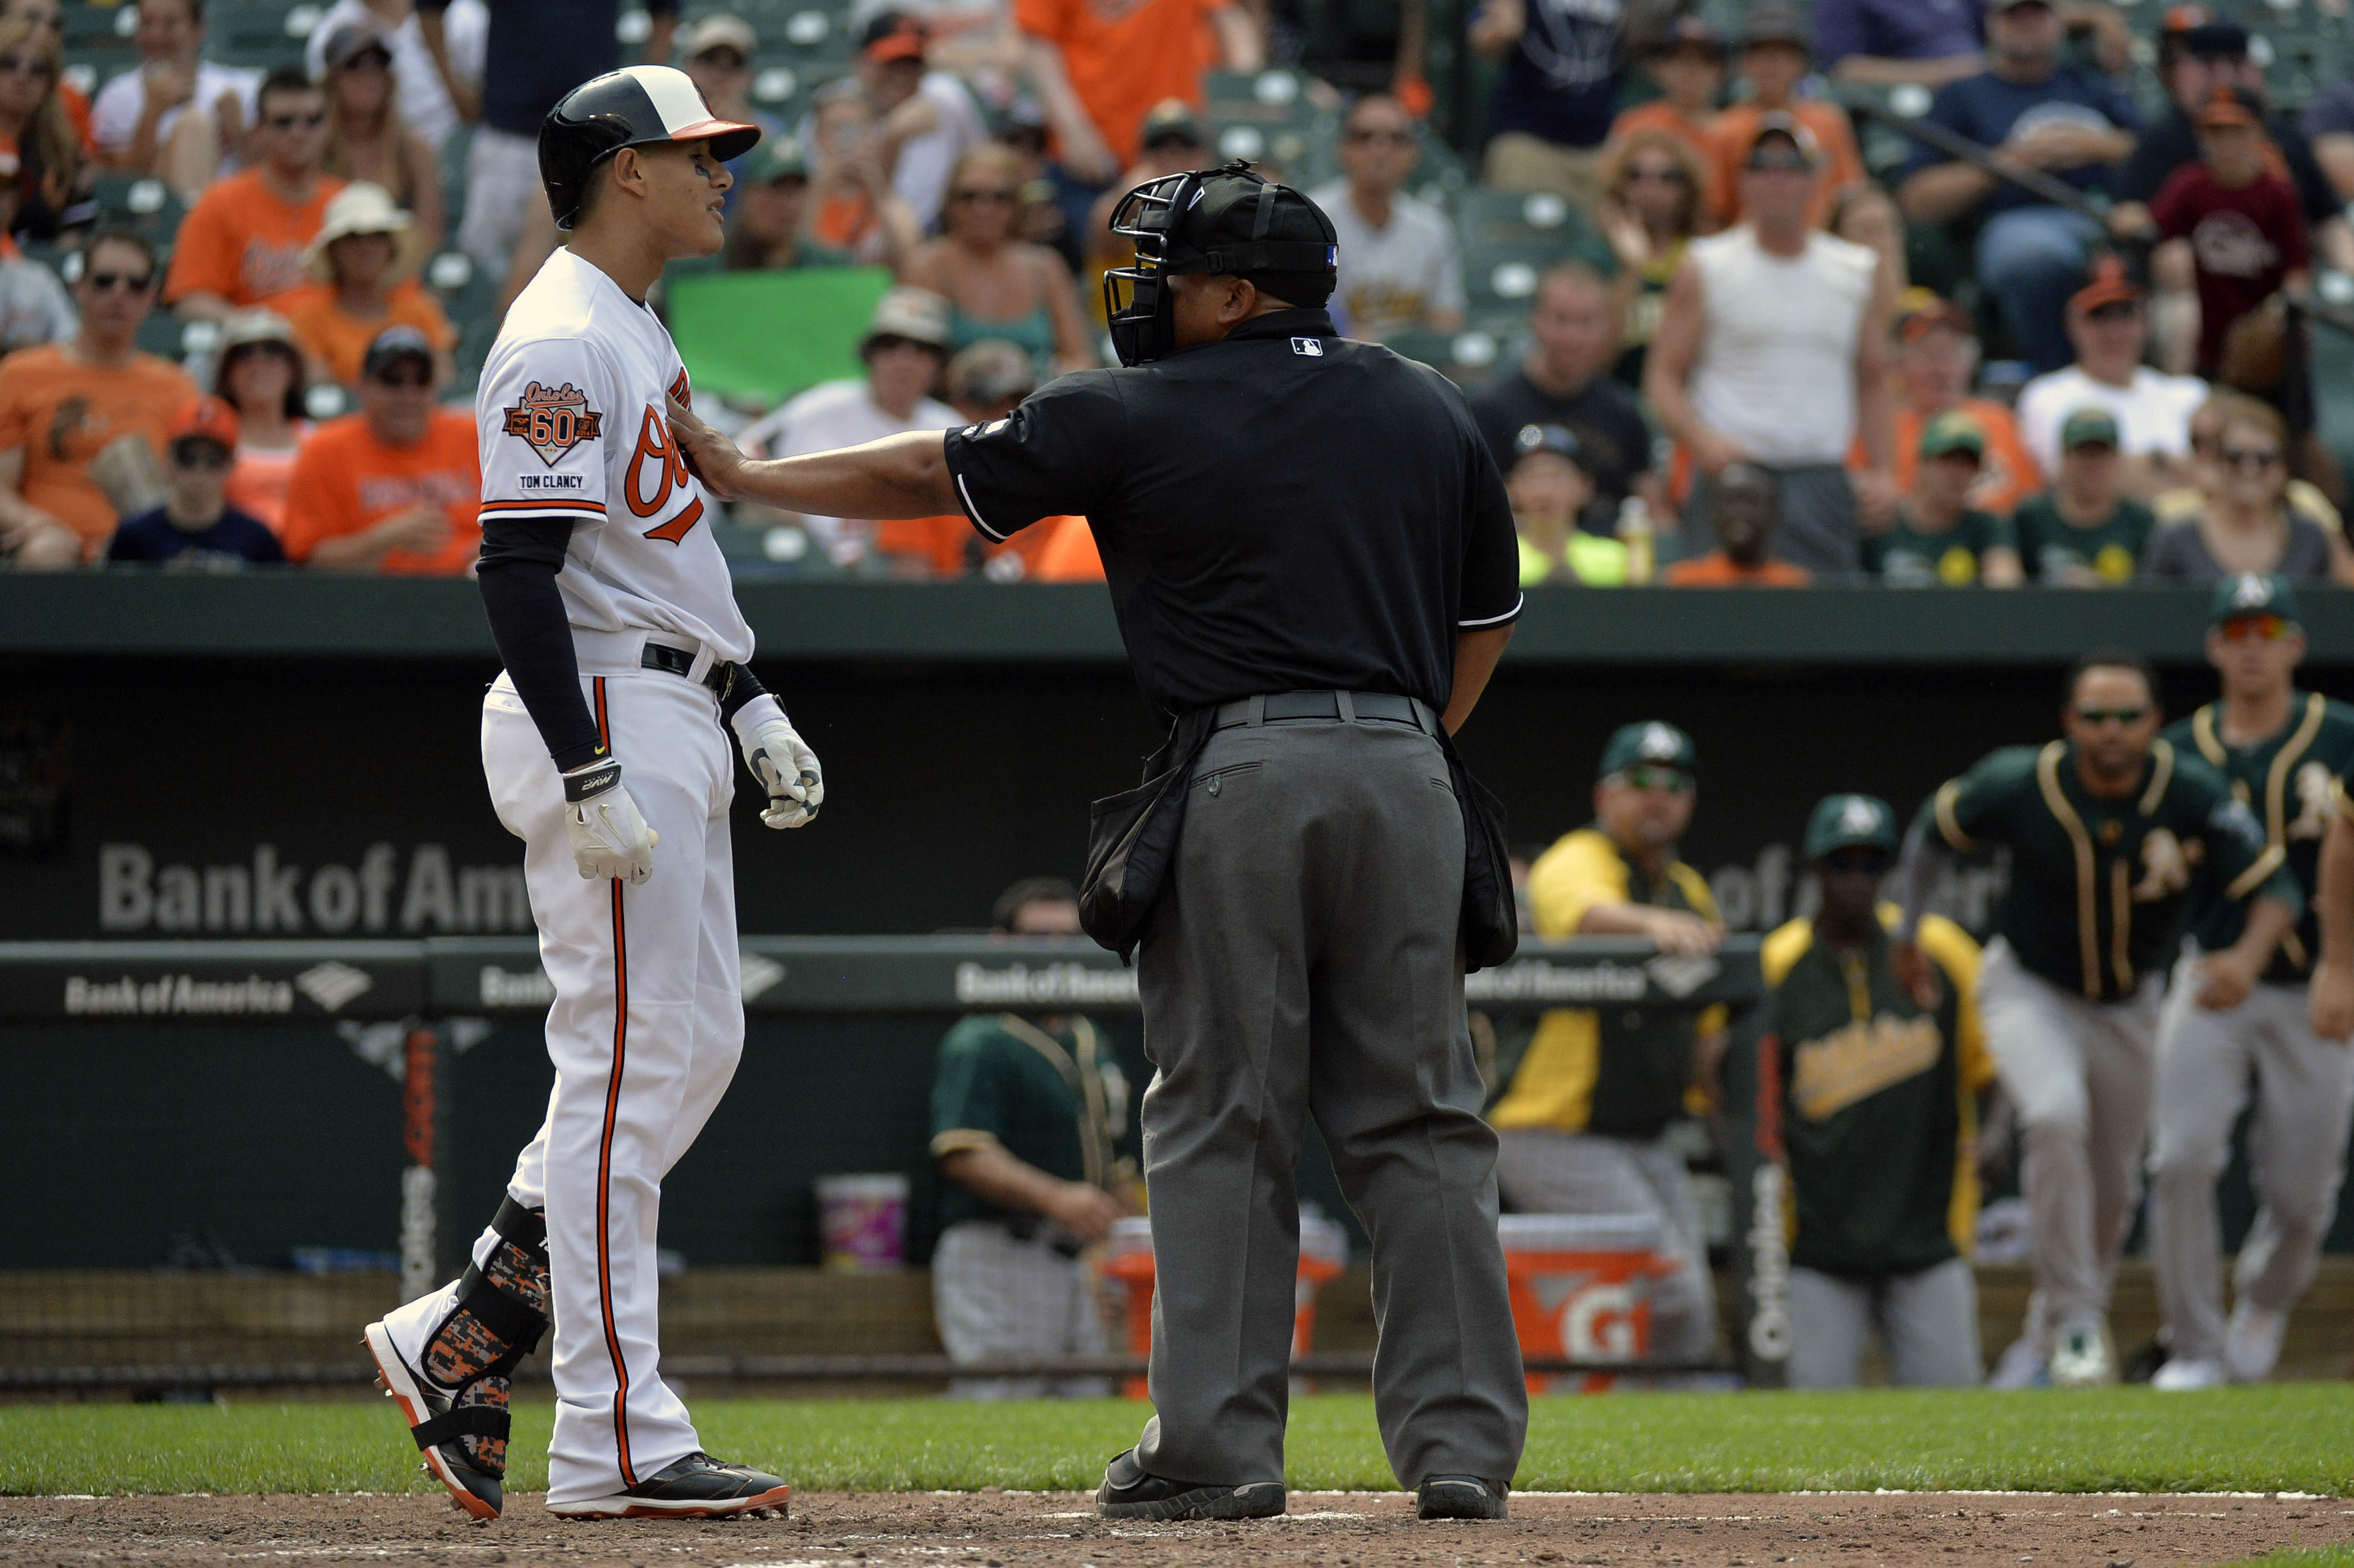 Did The Orioles Manny Machado Flip Out And Intentionally Throw His Bat